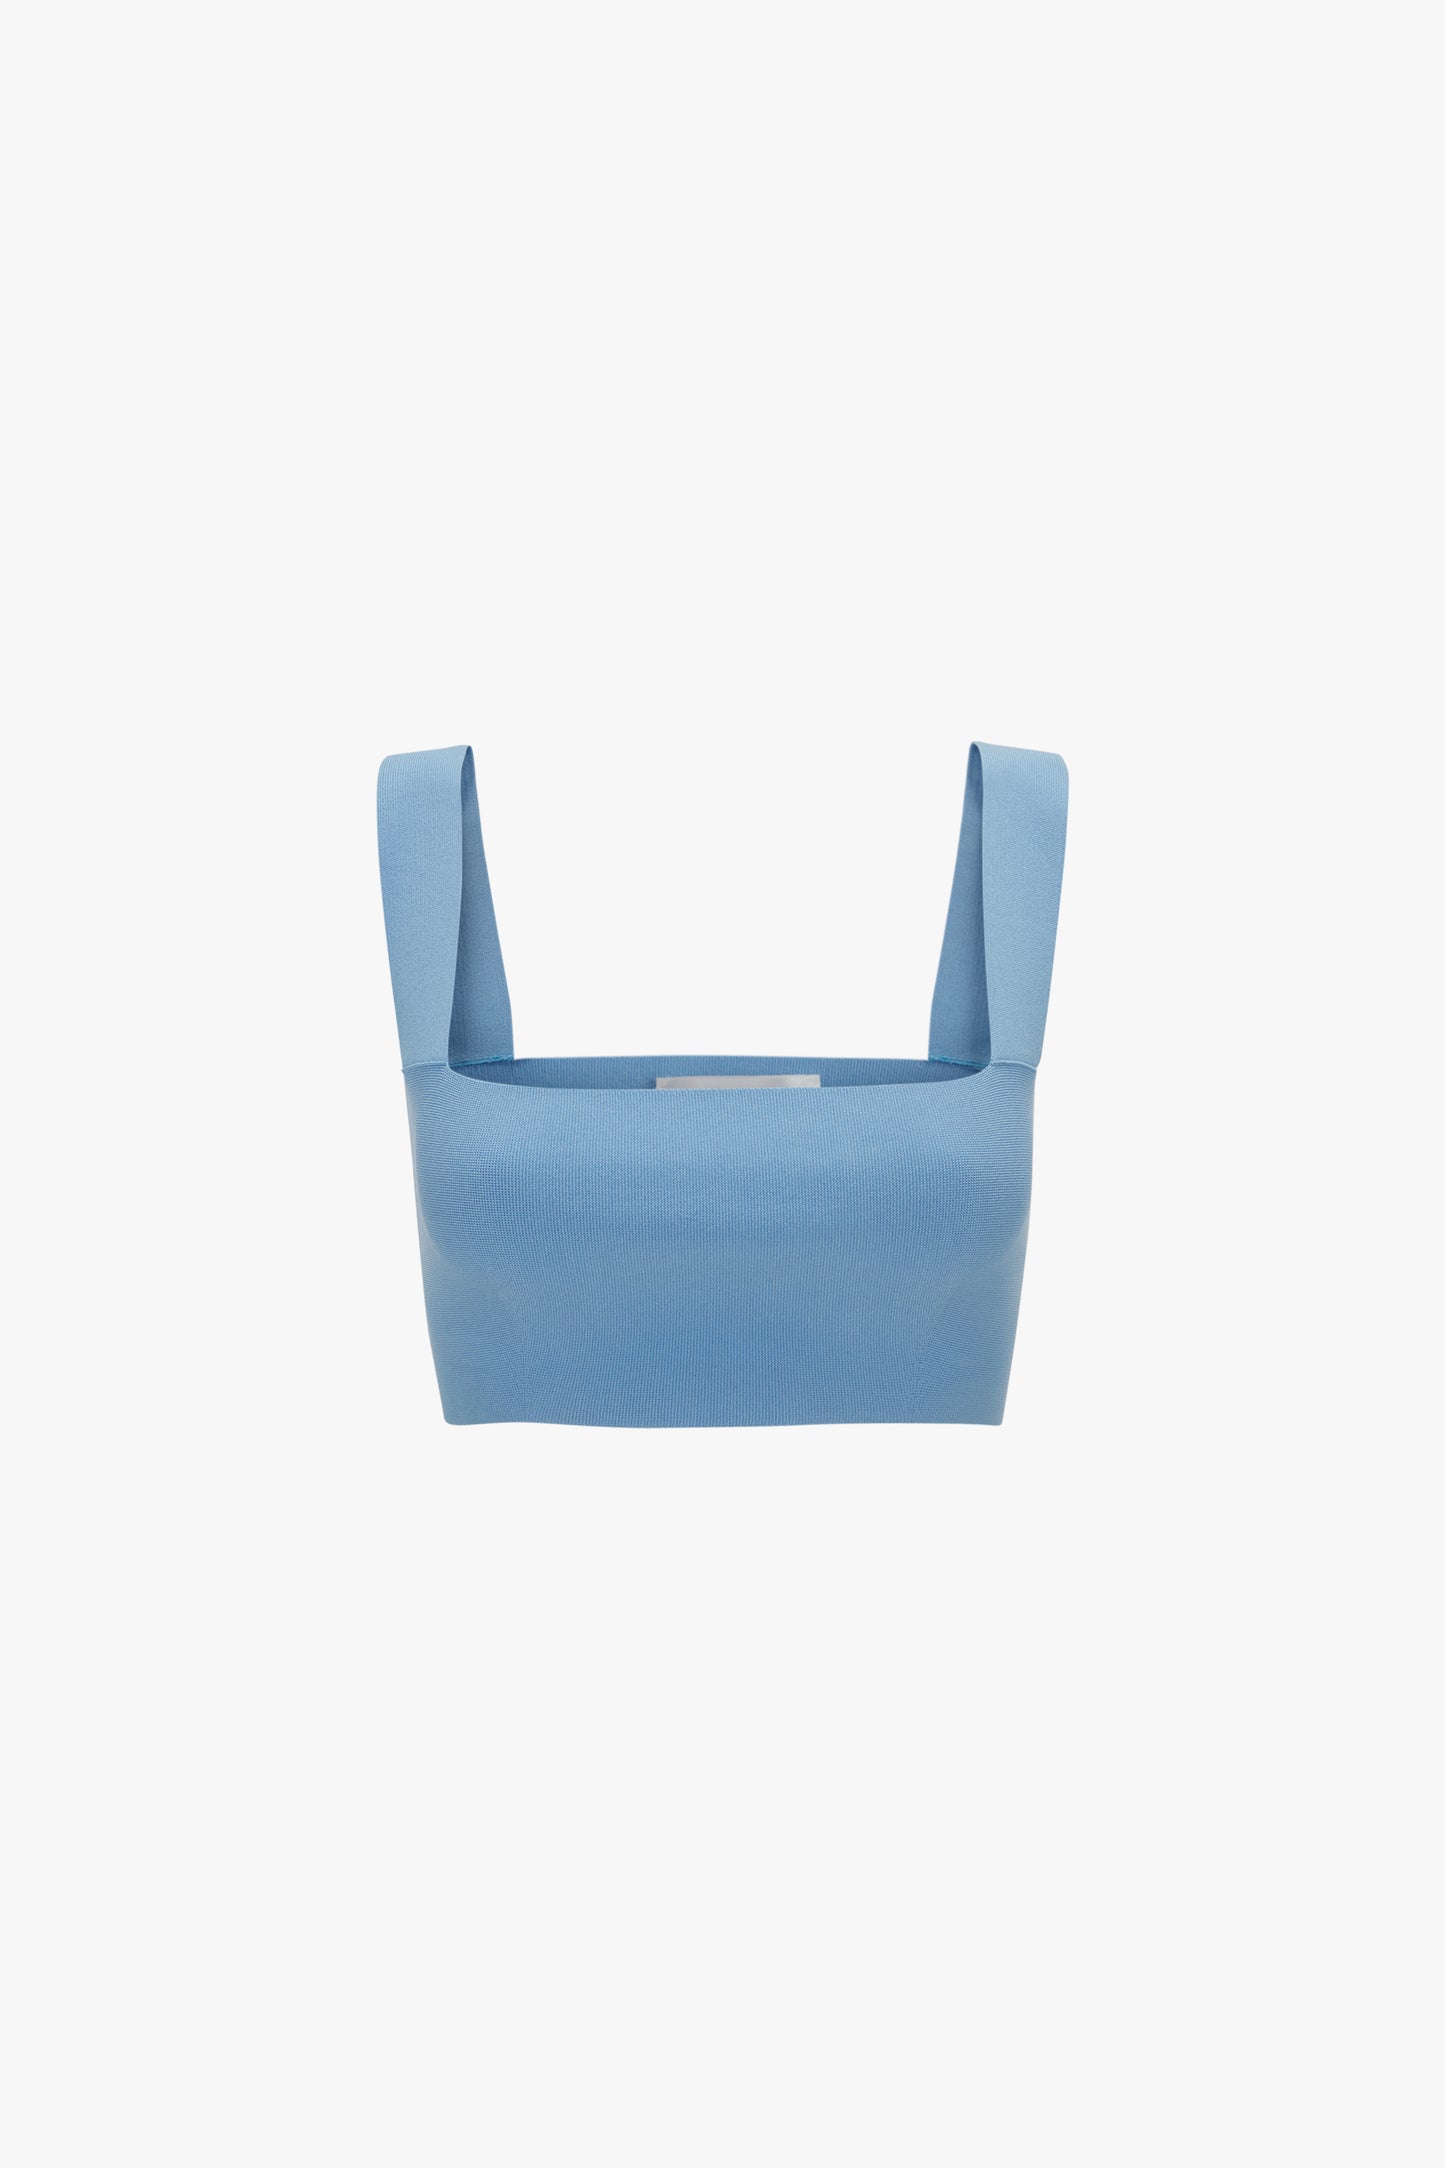 A light blue ultra form-fitting Strap Bandeau Top In Marina with wide shoulder straps, displayed against a plain white background from Victoria Beckham.